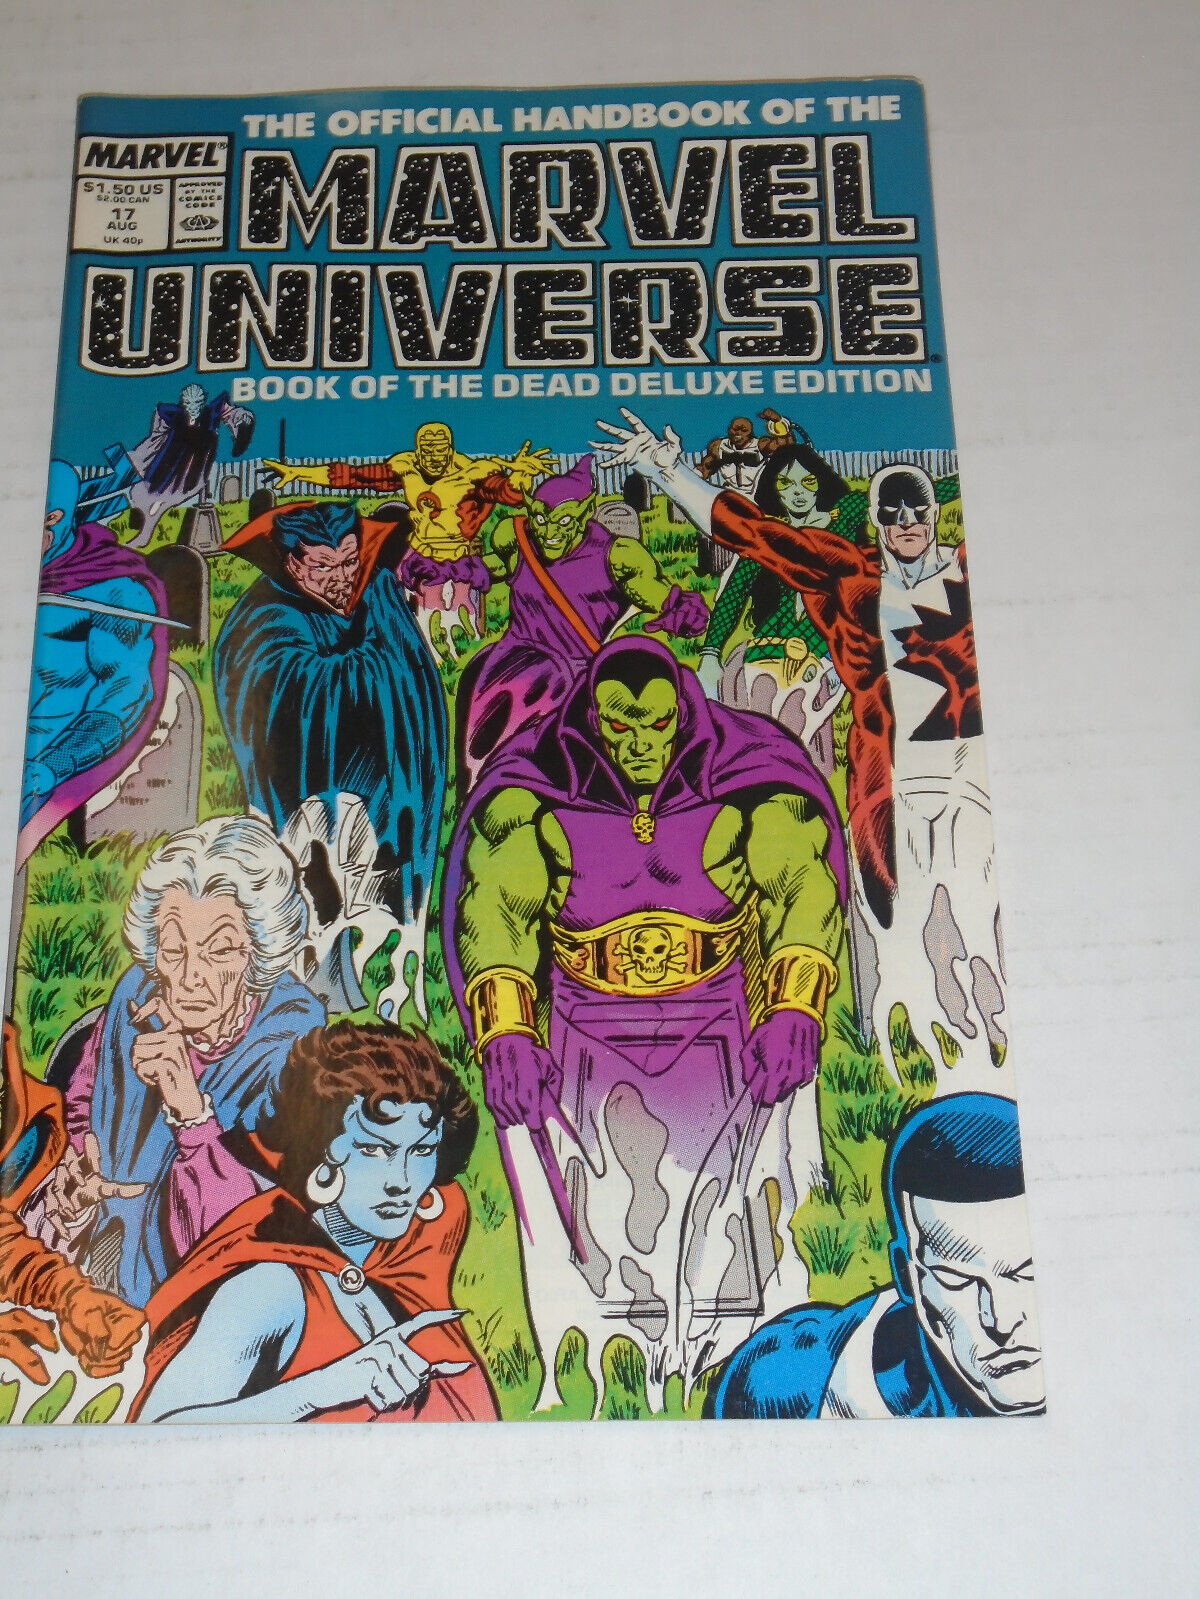 OFFICIAL HANDBOOK OF THE MARVEL UNIVERSE DELUXE EDITION #17 (1987) Drax, Dracula